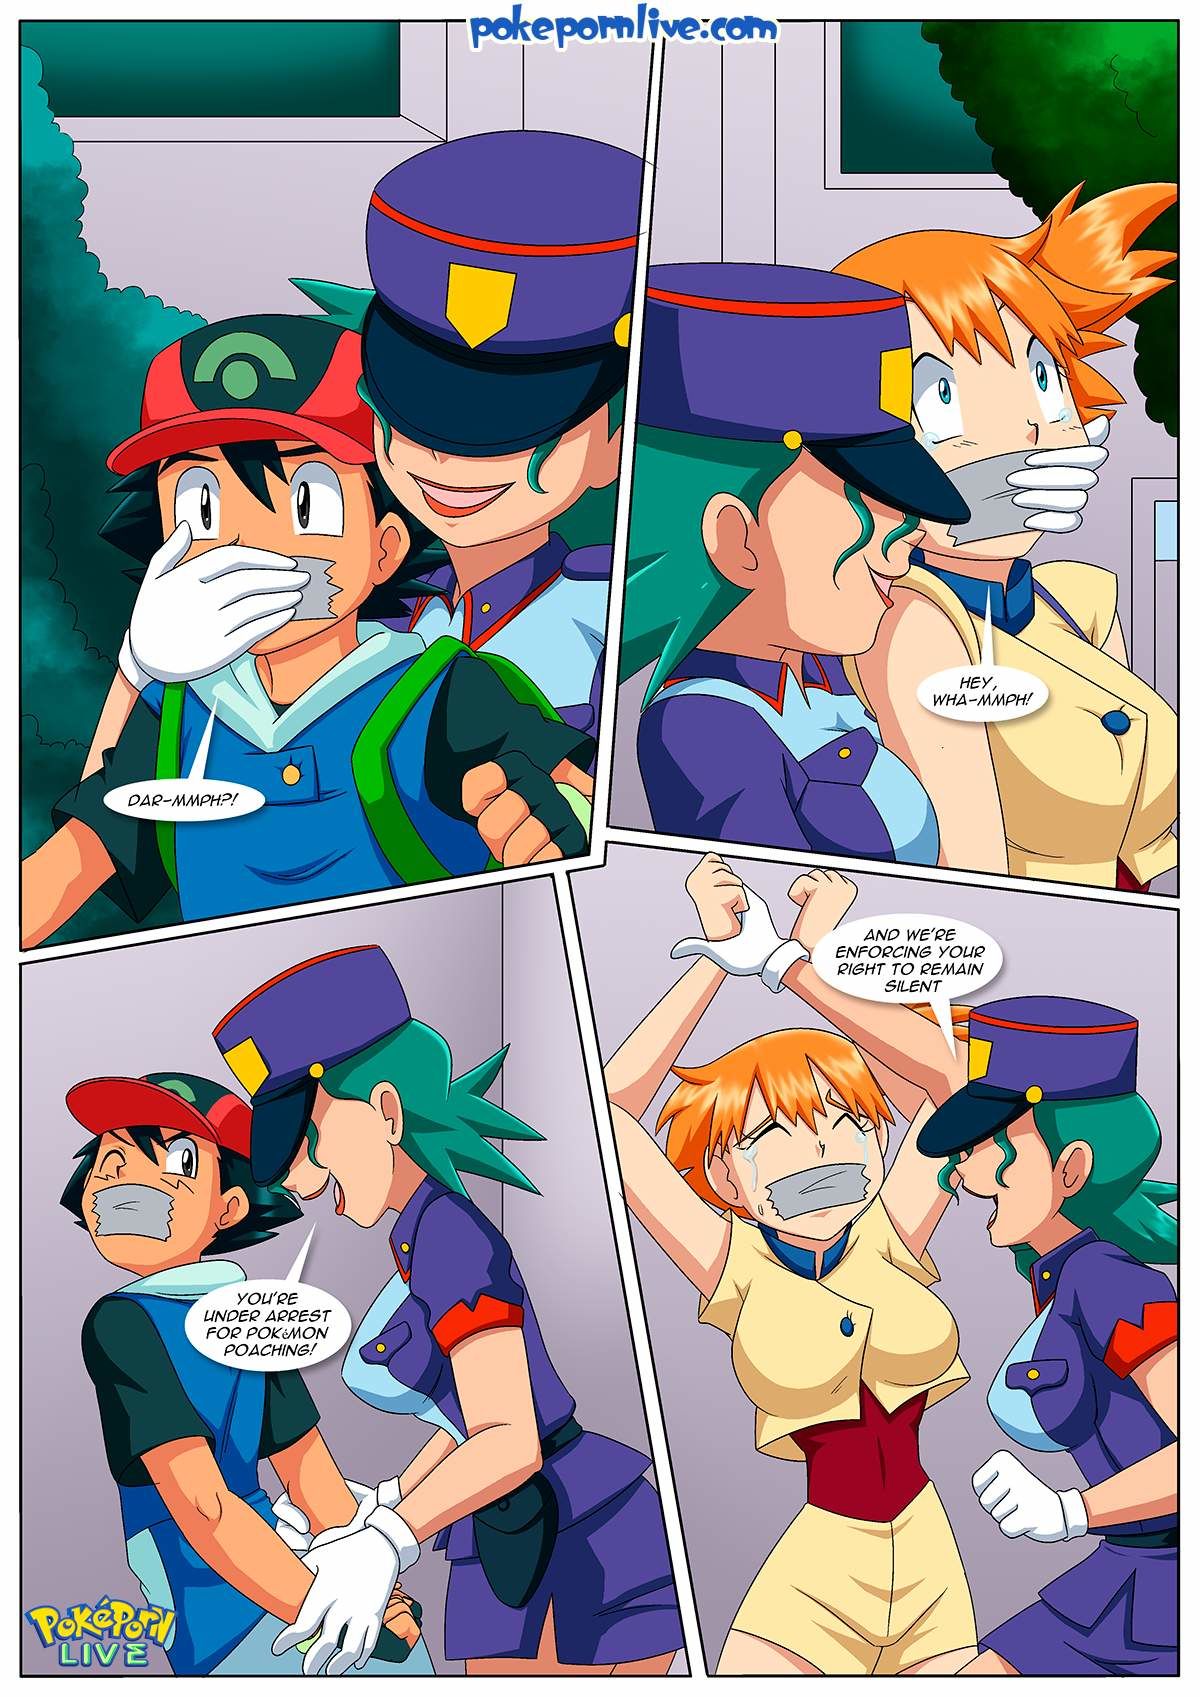 To Catch A Trainer - Palcomix page 3